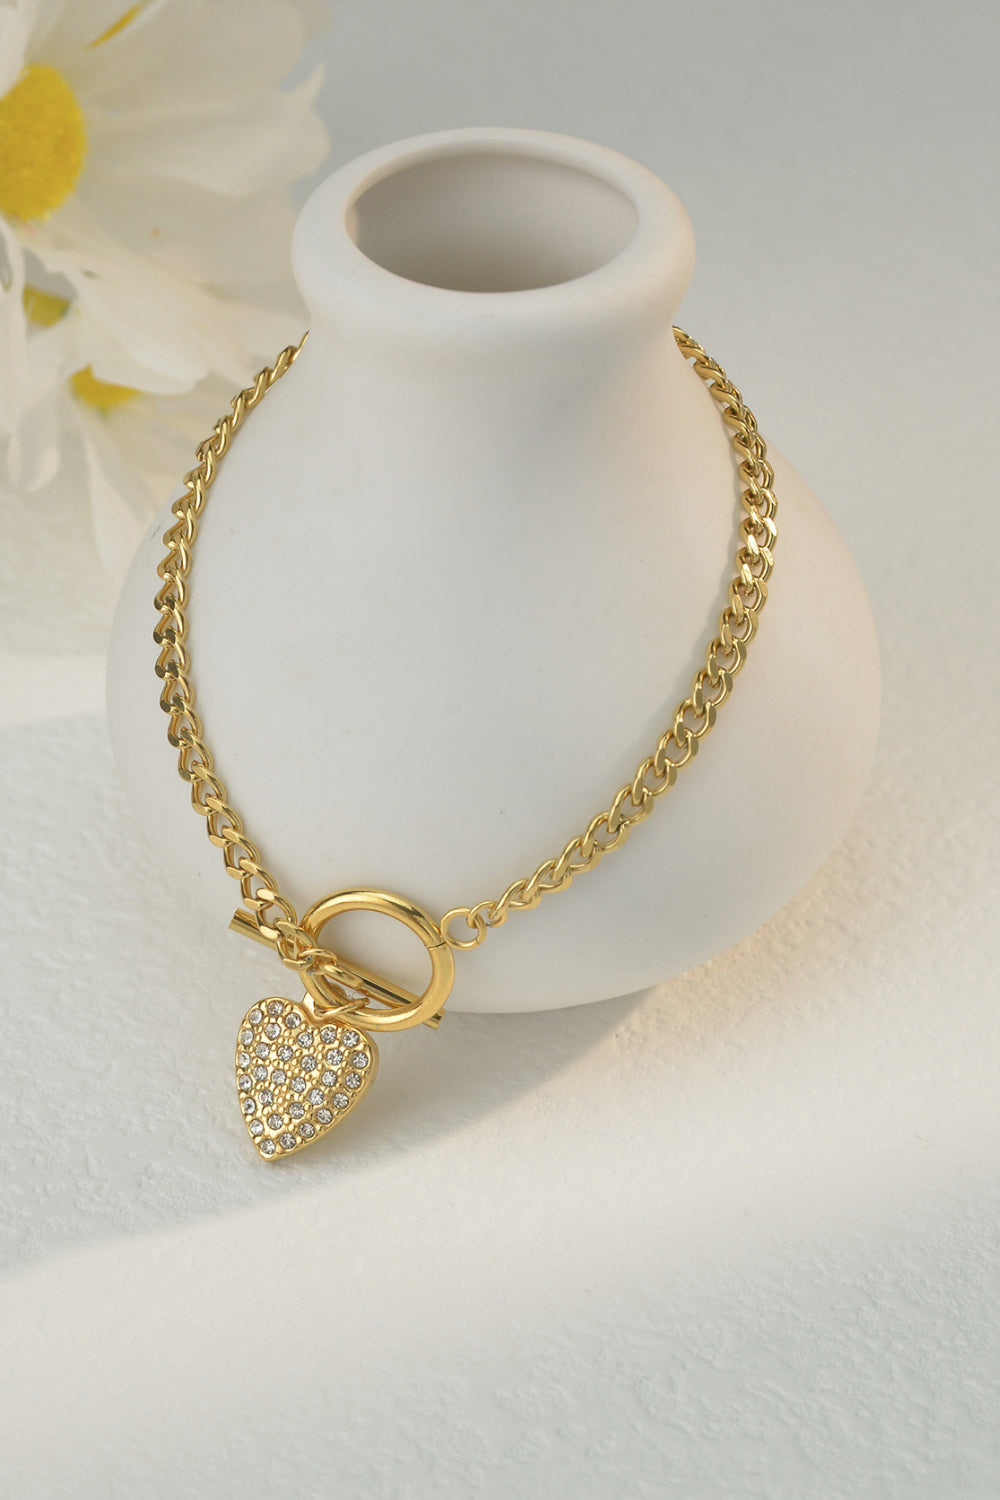 Nature's Heart Gold Bracelet | Hypoallergenic - Allergy Friendly - Naturally Free